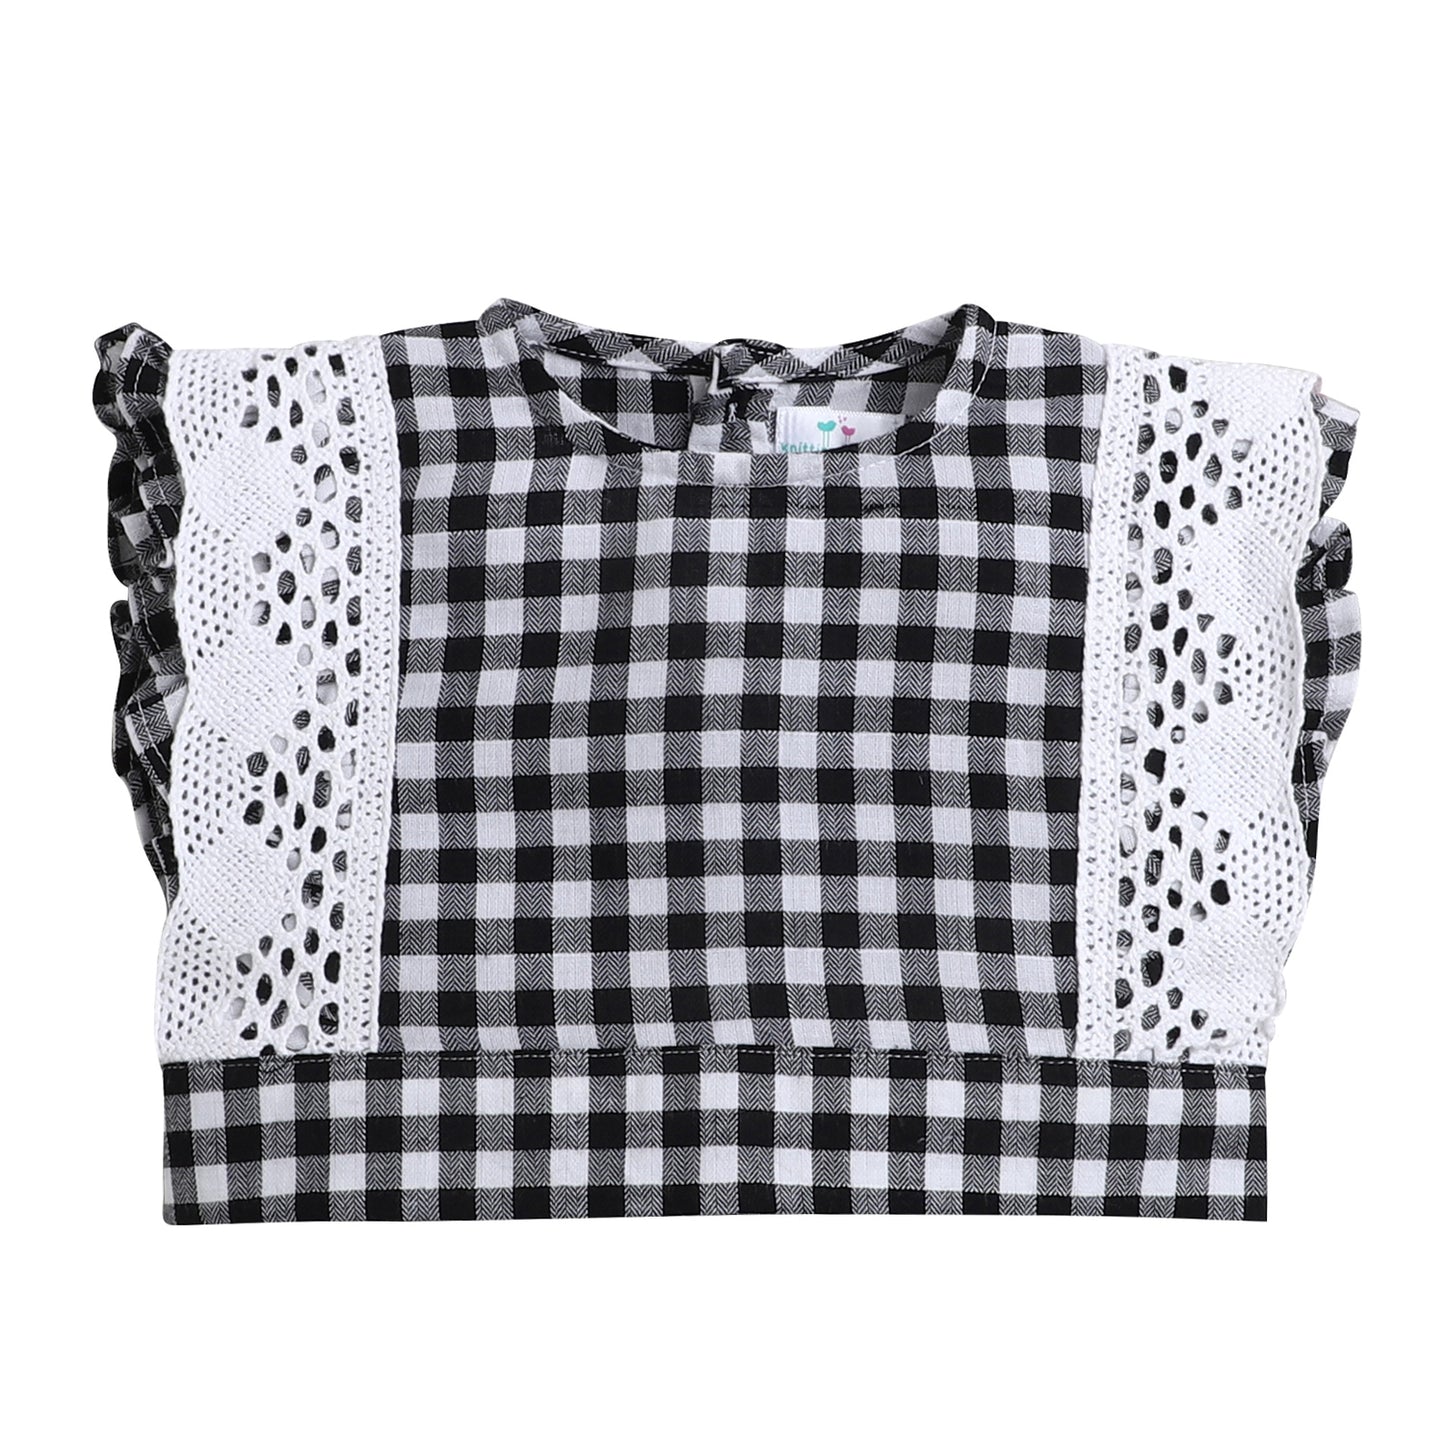 Black & White Checks Coord Set- Crop Top With Lace And Paper Bag Pant